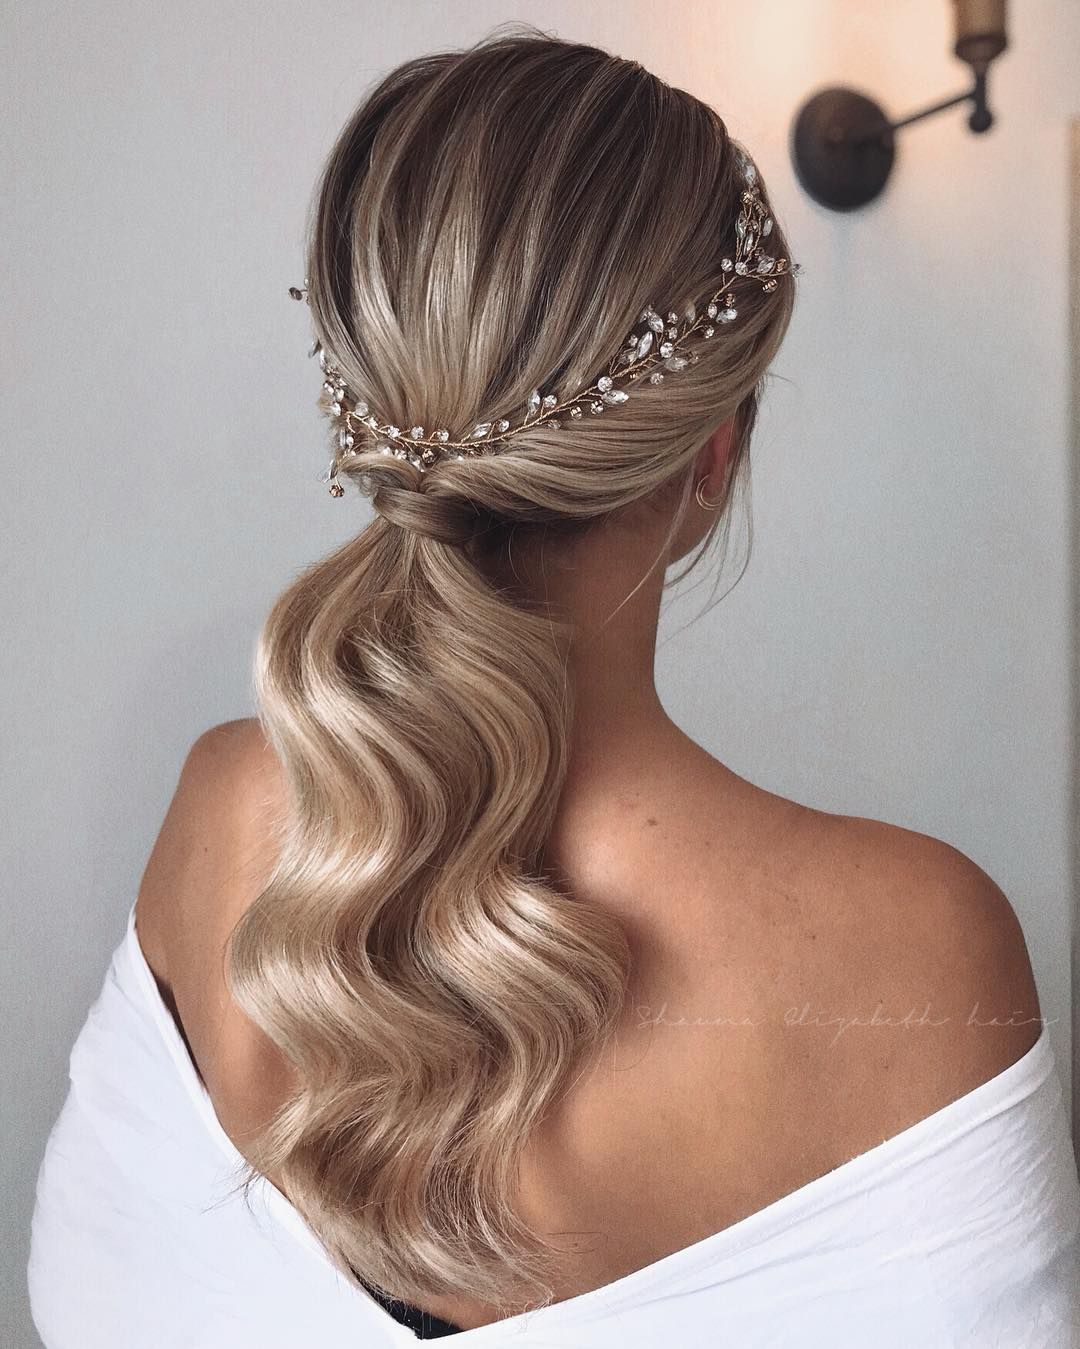 51+ STUNNING WEDDING HAIRSTYLES YOU'LL LOVE -   11 hair Prom extensions ideas